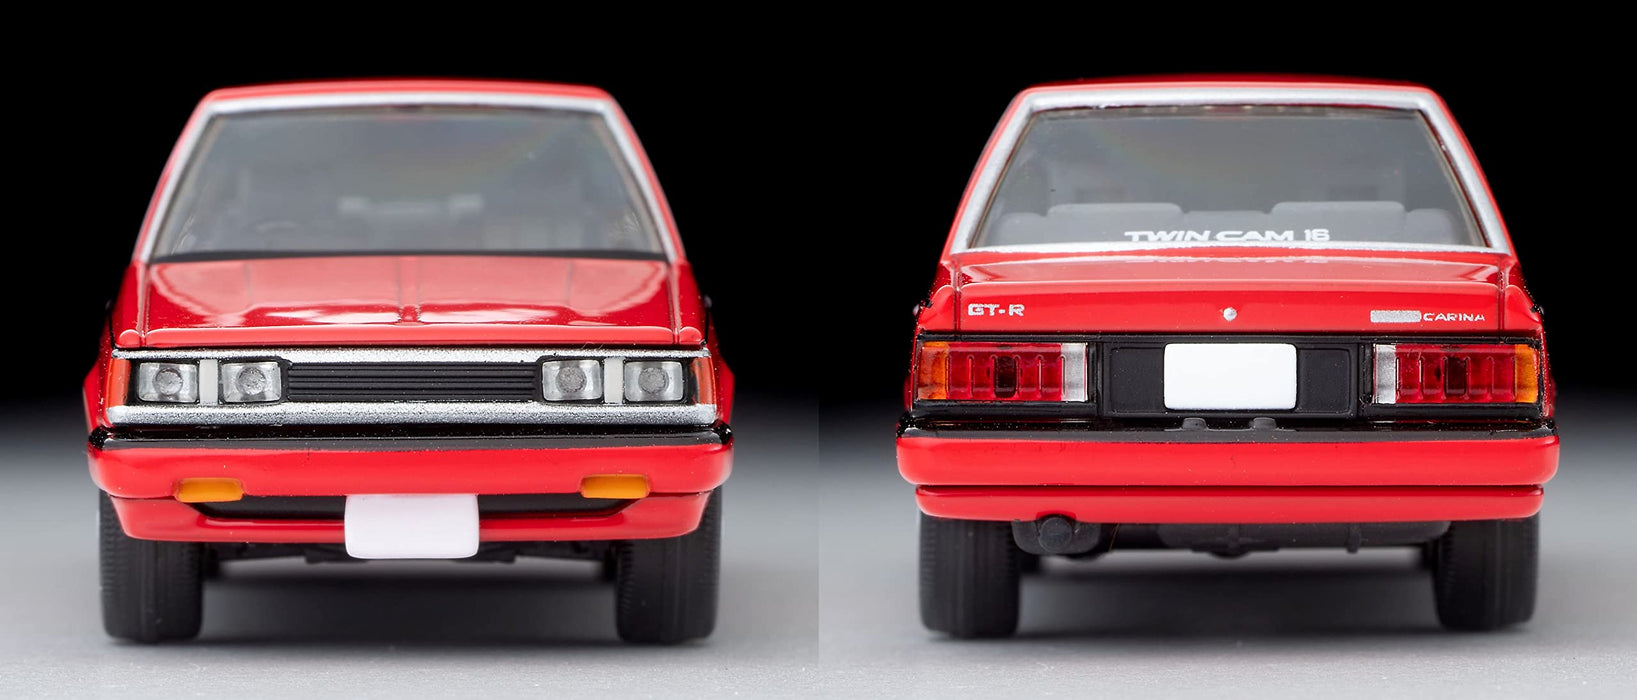 Tomytec Toyota Carina 1600GT-R 1984 Red 1/64 Tomica Limited Vintage Neo